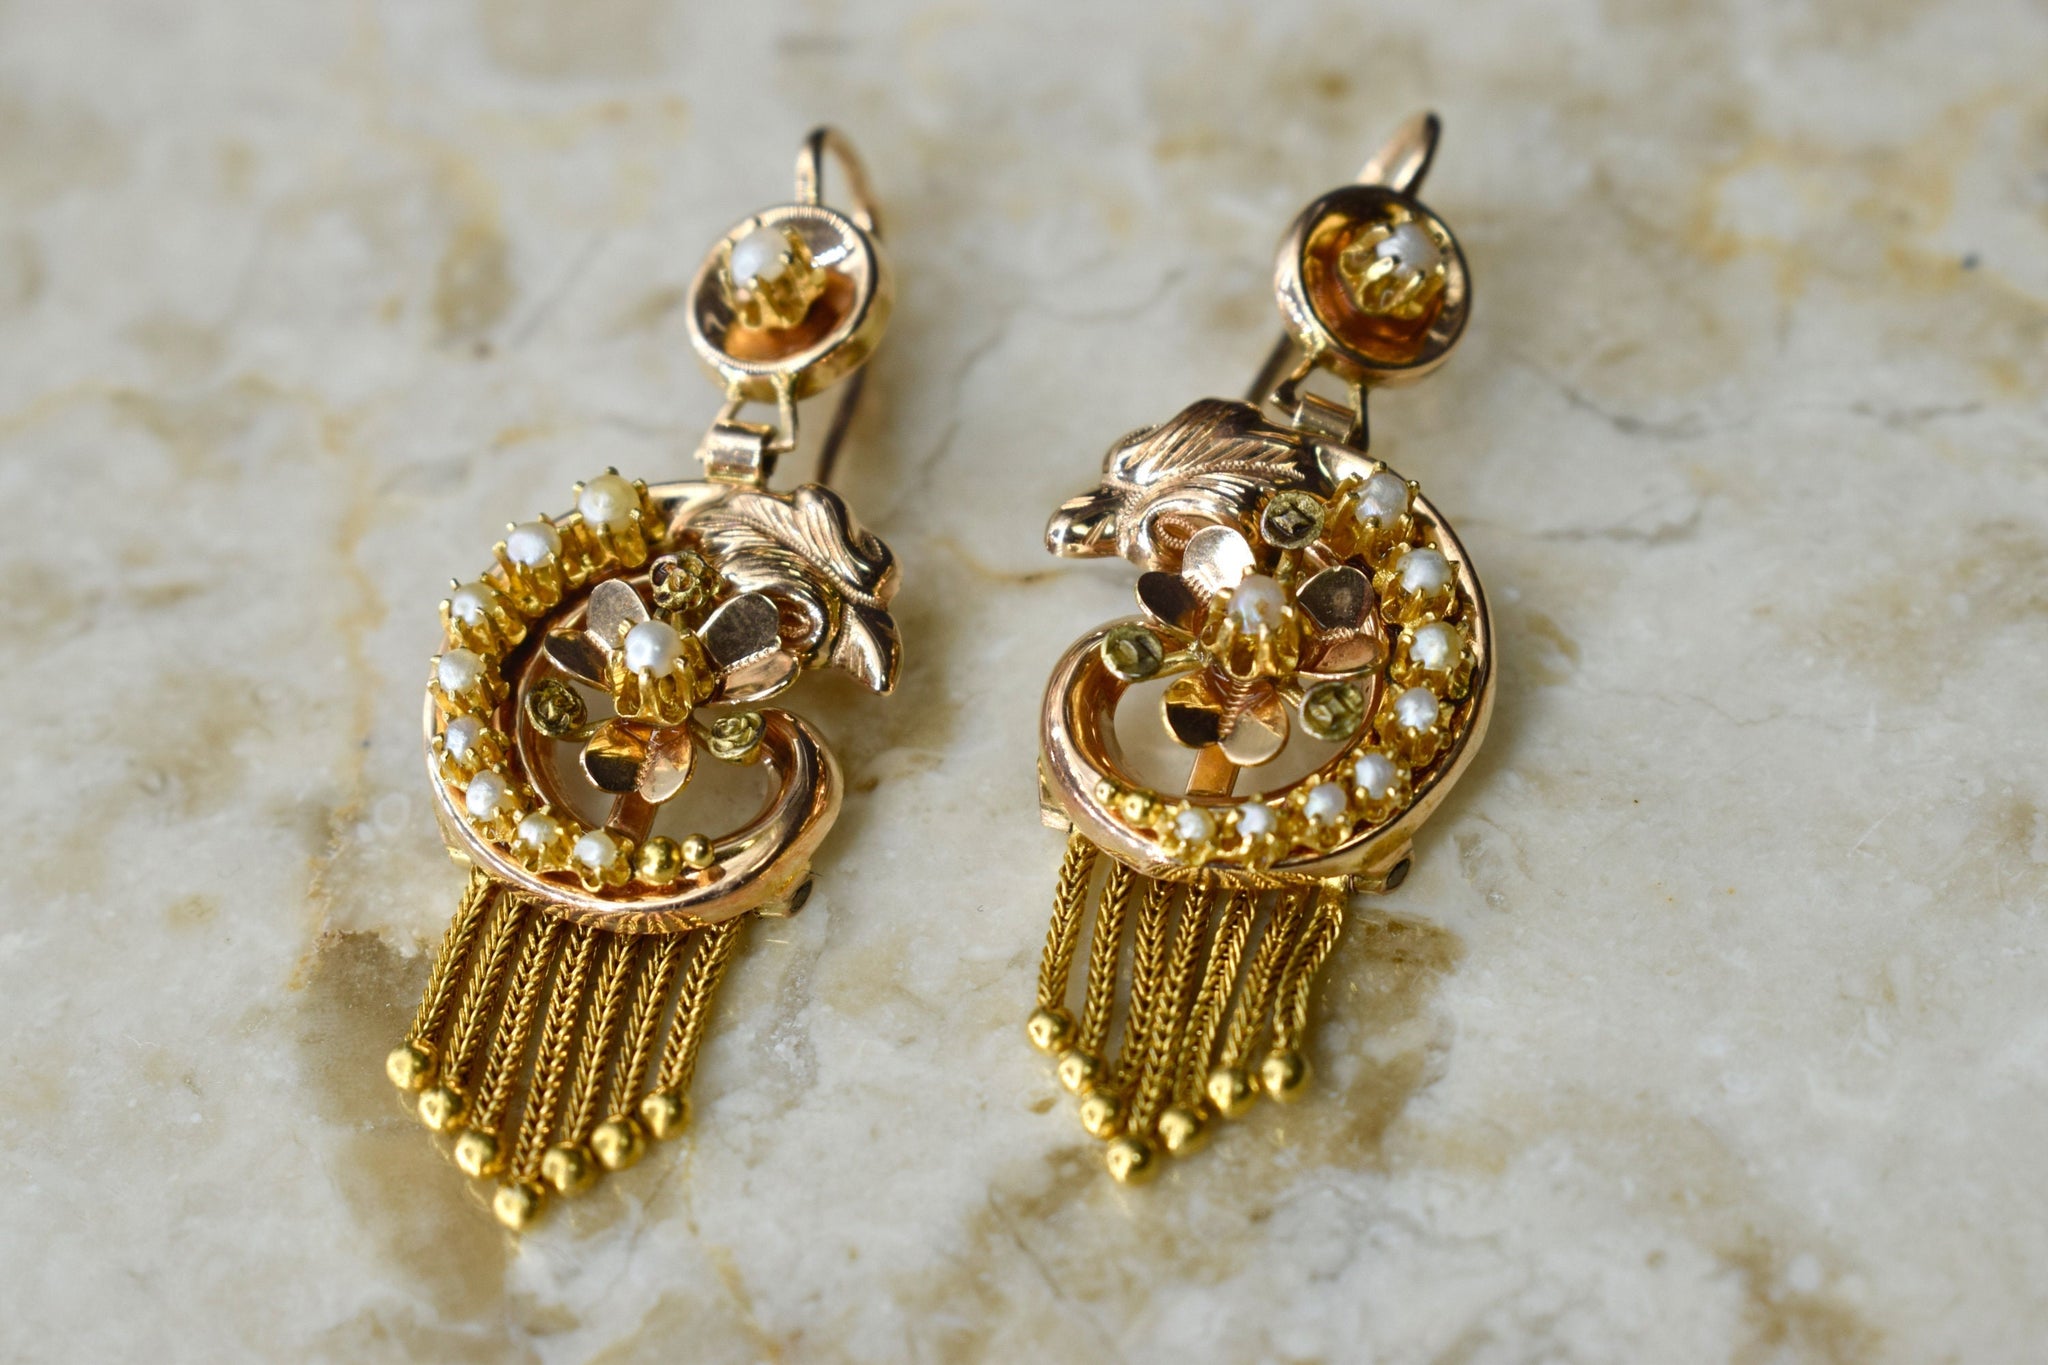 Antique Victorian 14k Gold Swan Earrings with Seed Pearls